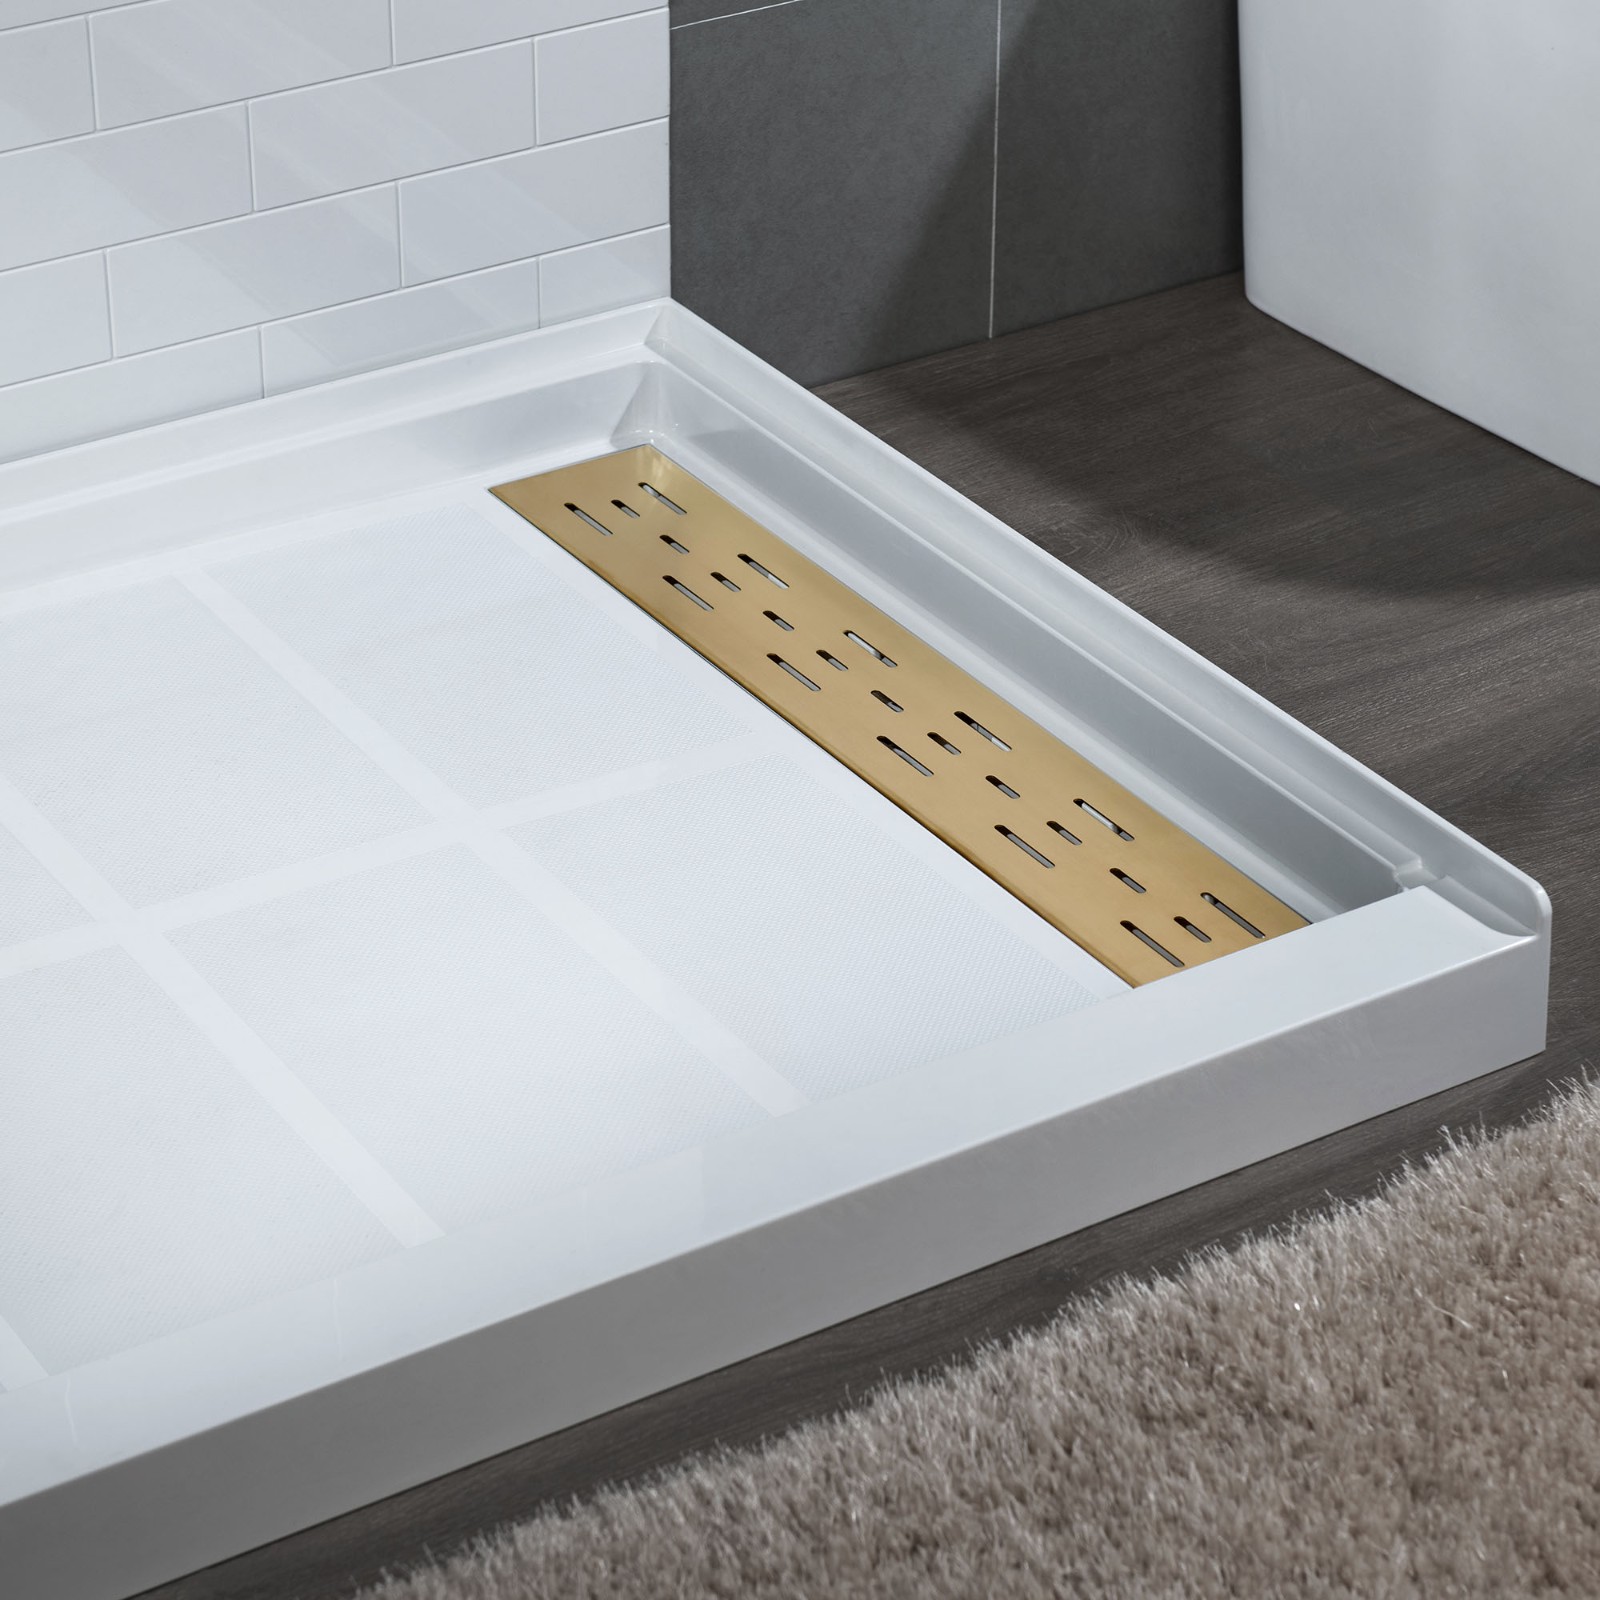  WOODBRIDGE SBR6032-1000R-BG SolidSurface Shower Base with Recessed Trench Side Including Brushed Gold Linear Cover, 60